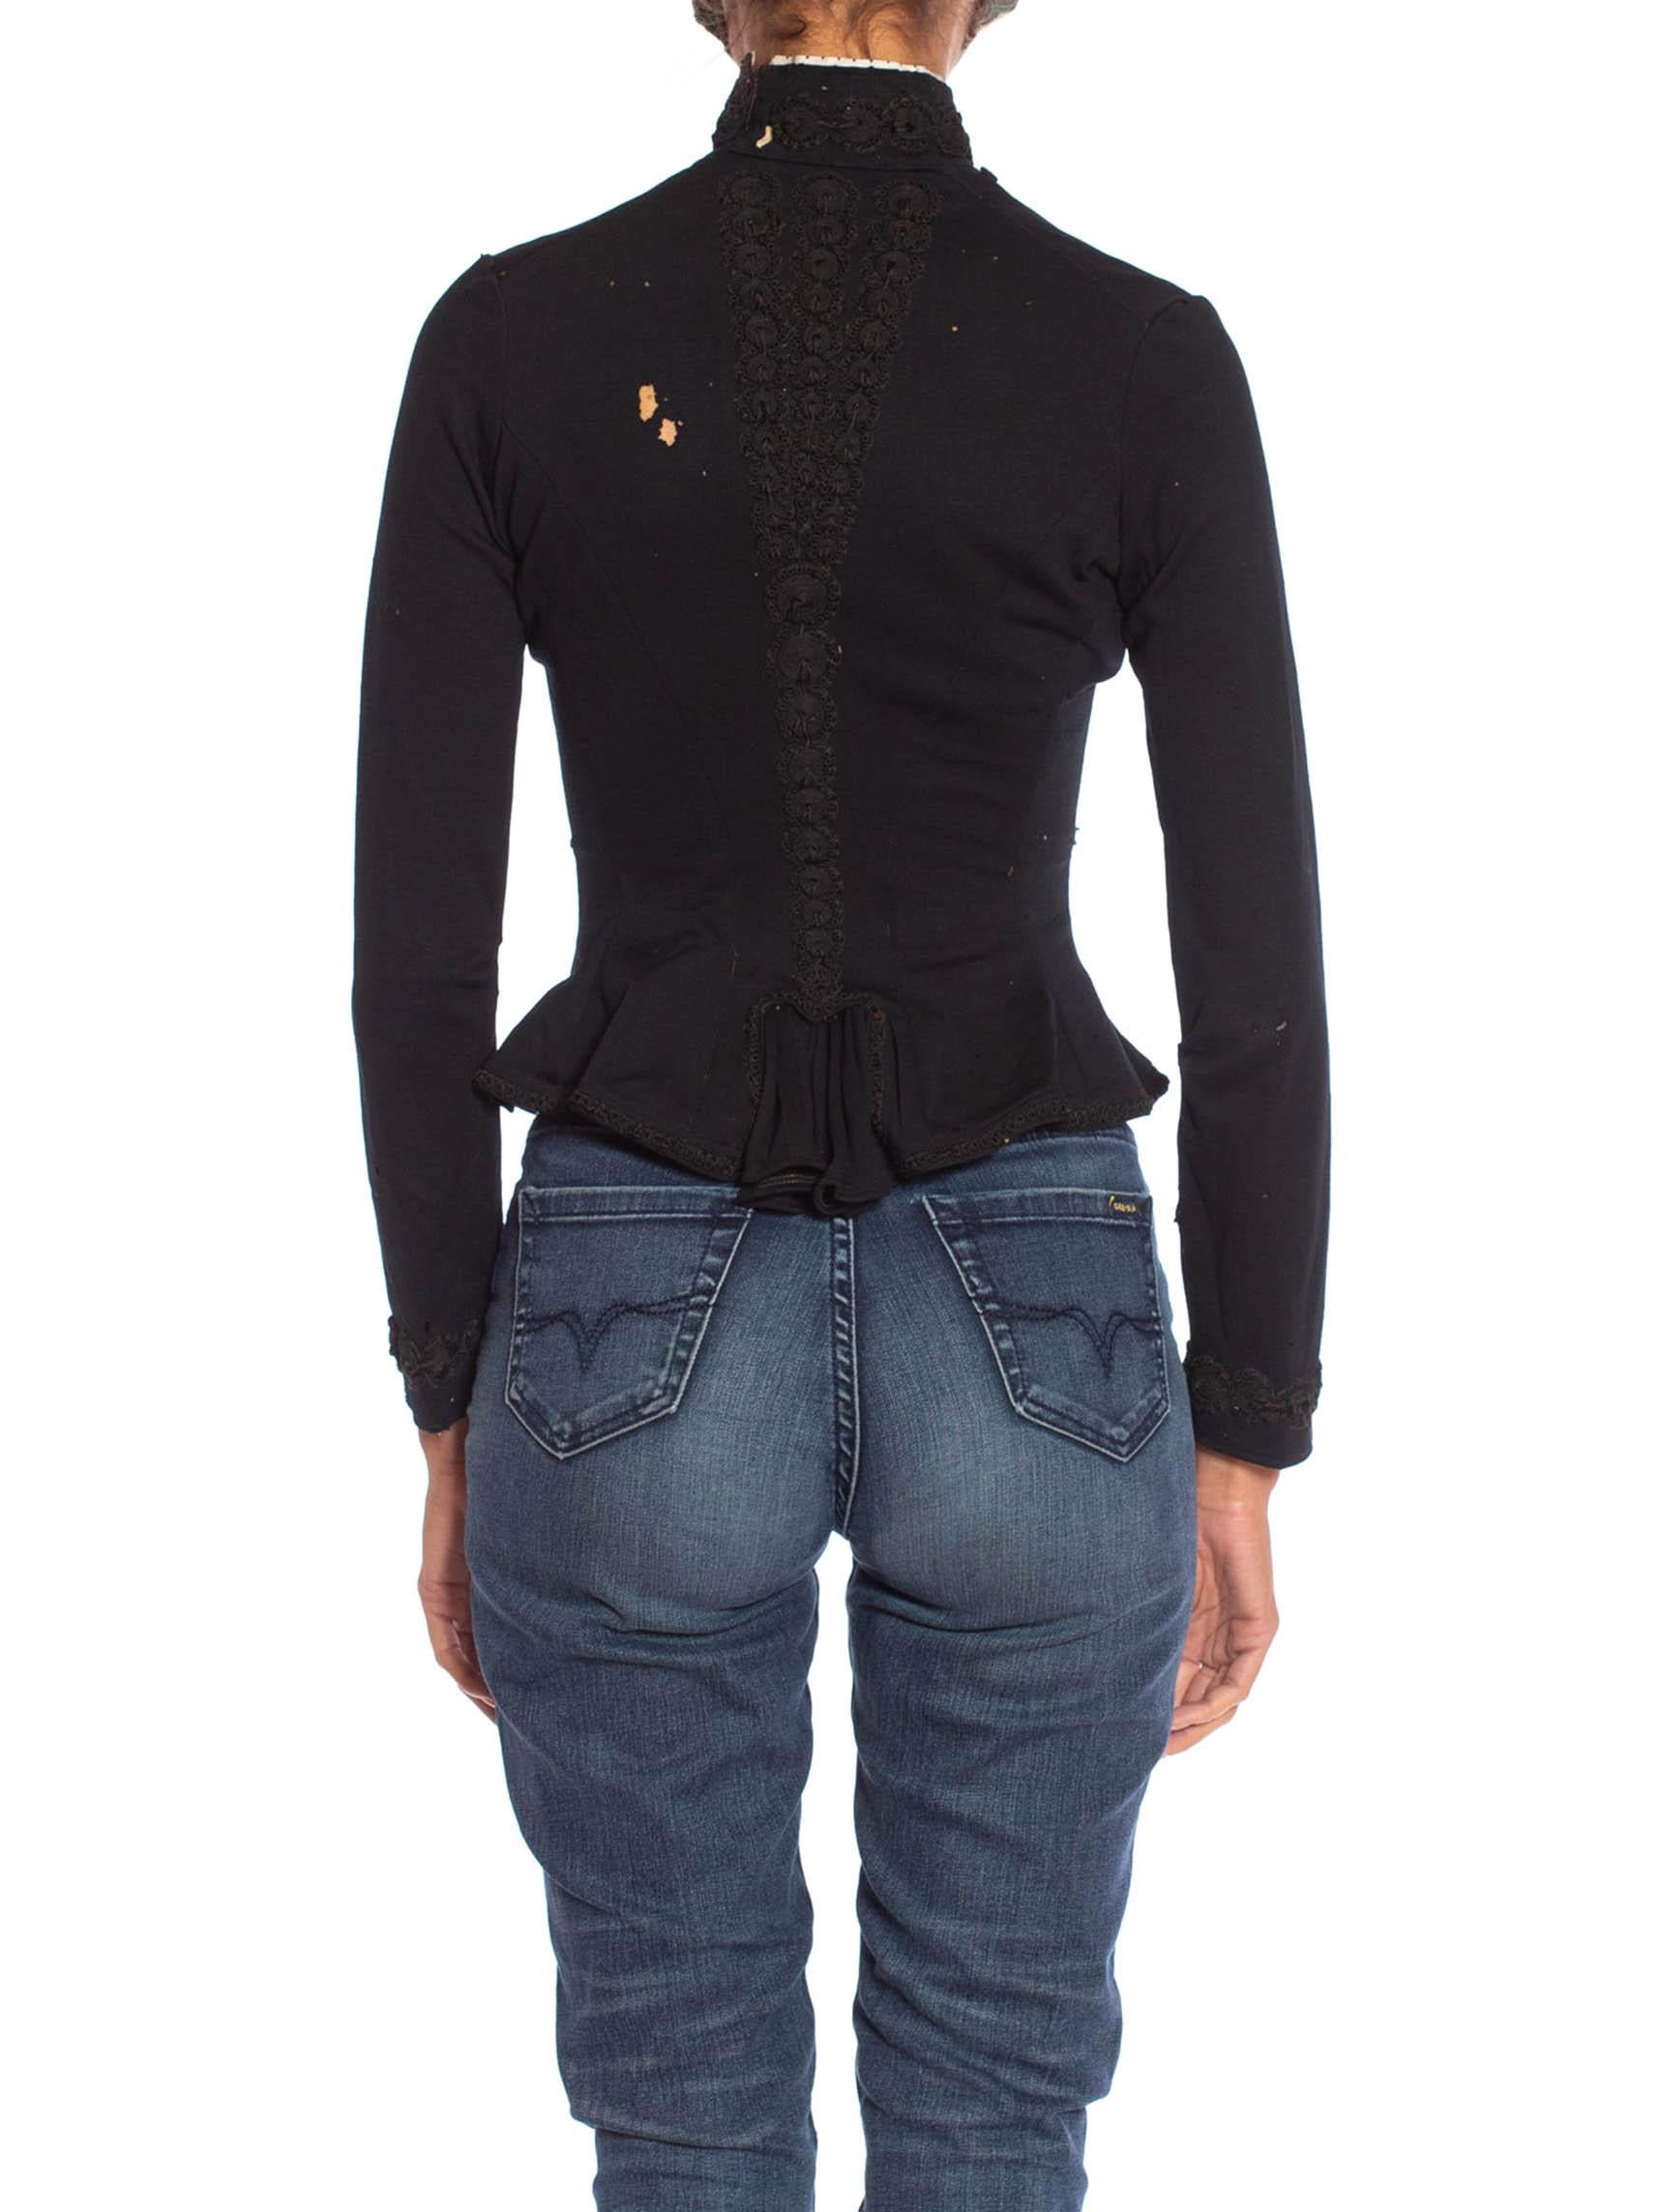 Victorian Black Wool Blend Knit Beautifully Tattered & Embroidered 1880S Top Fr For Sale 6